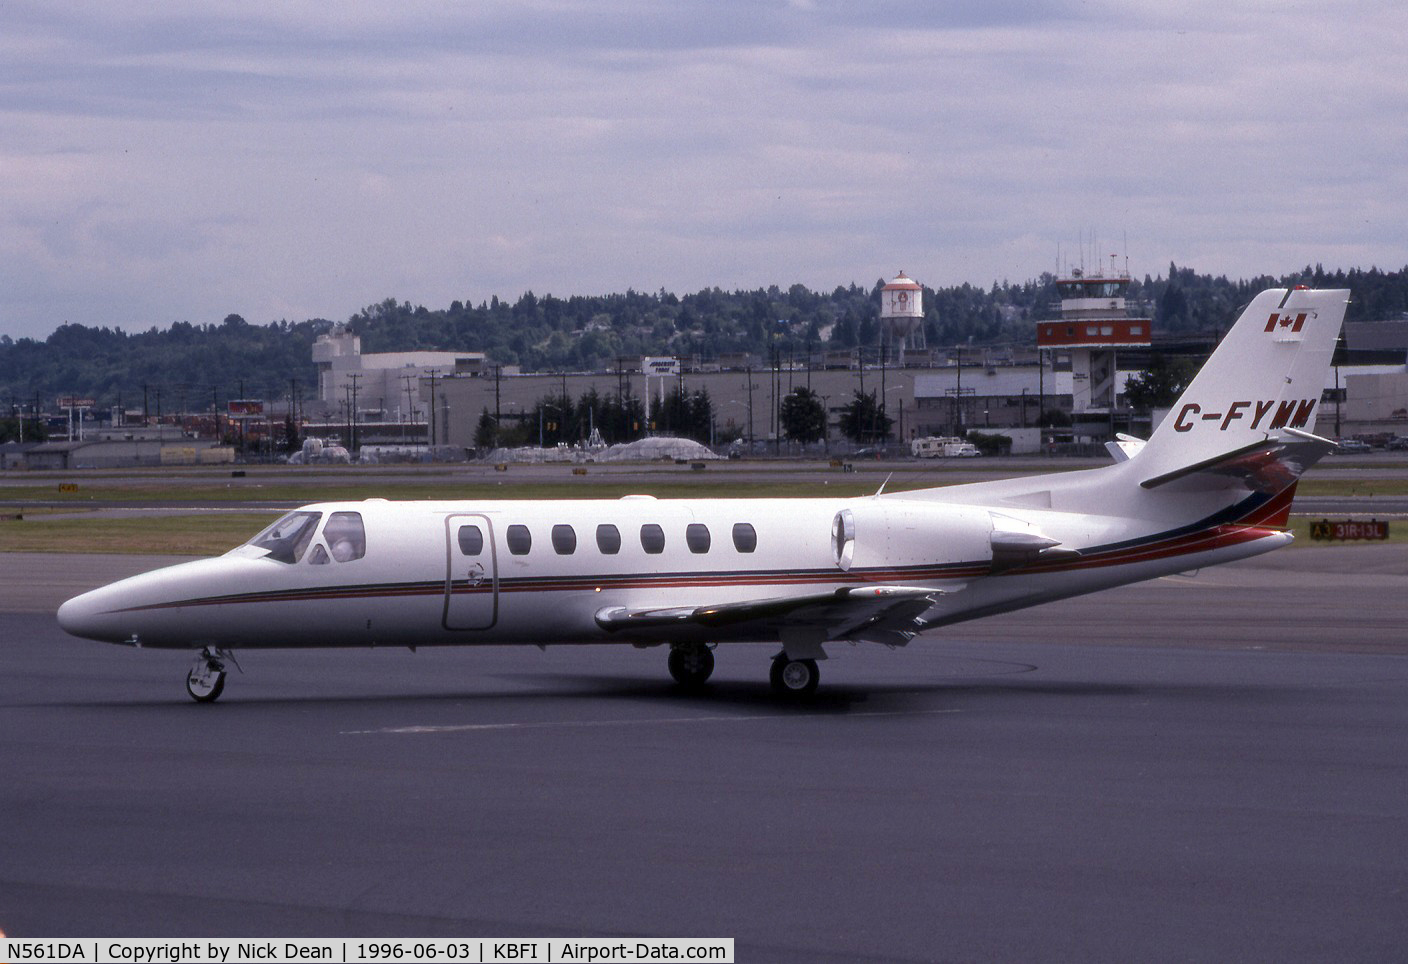 N561DA, 1995 Cessna 560 C/N 5600314, KBFI (Seen here as C-FYMM this airframe is currently registered N561DA as posted)